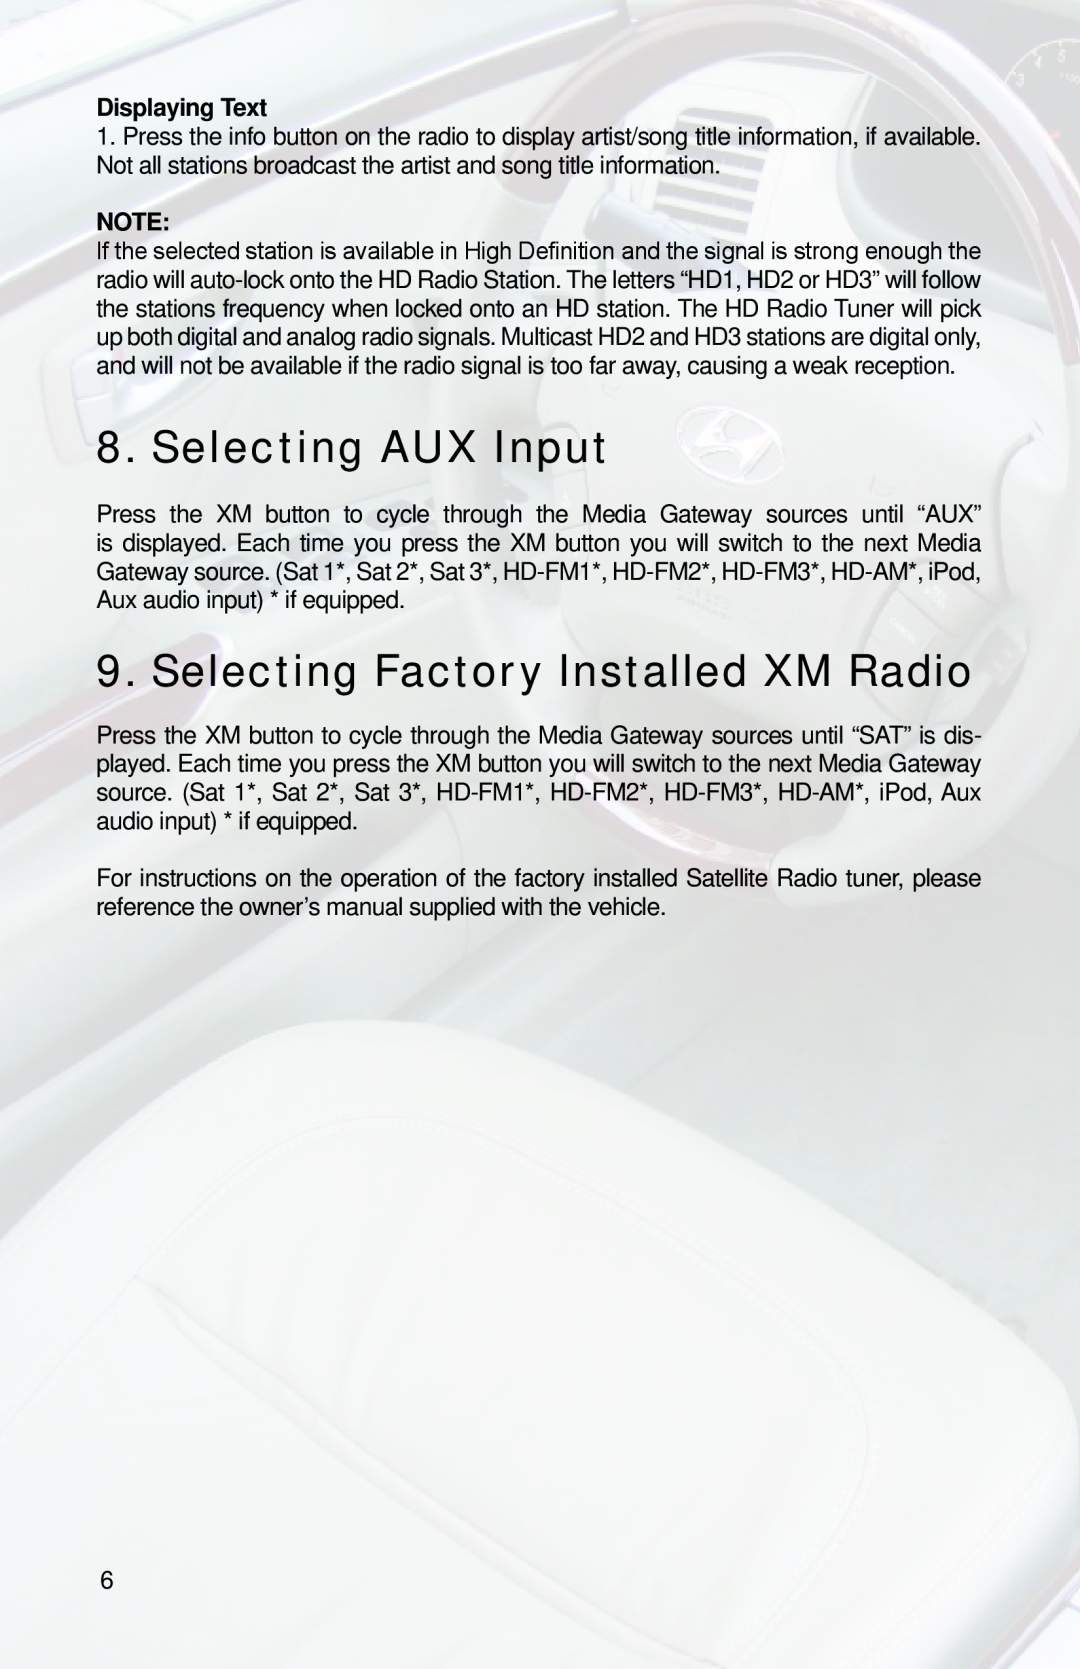 iSimple PGHHY1 owner manual Selecting AUX Input, Selecting Factory Installed XM Radio, Displaying Text 